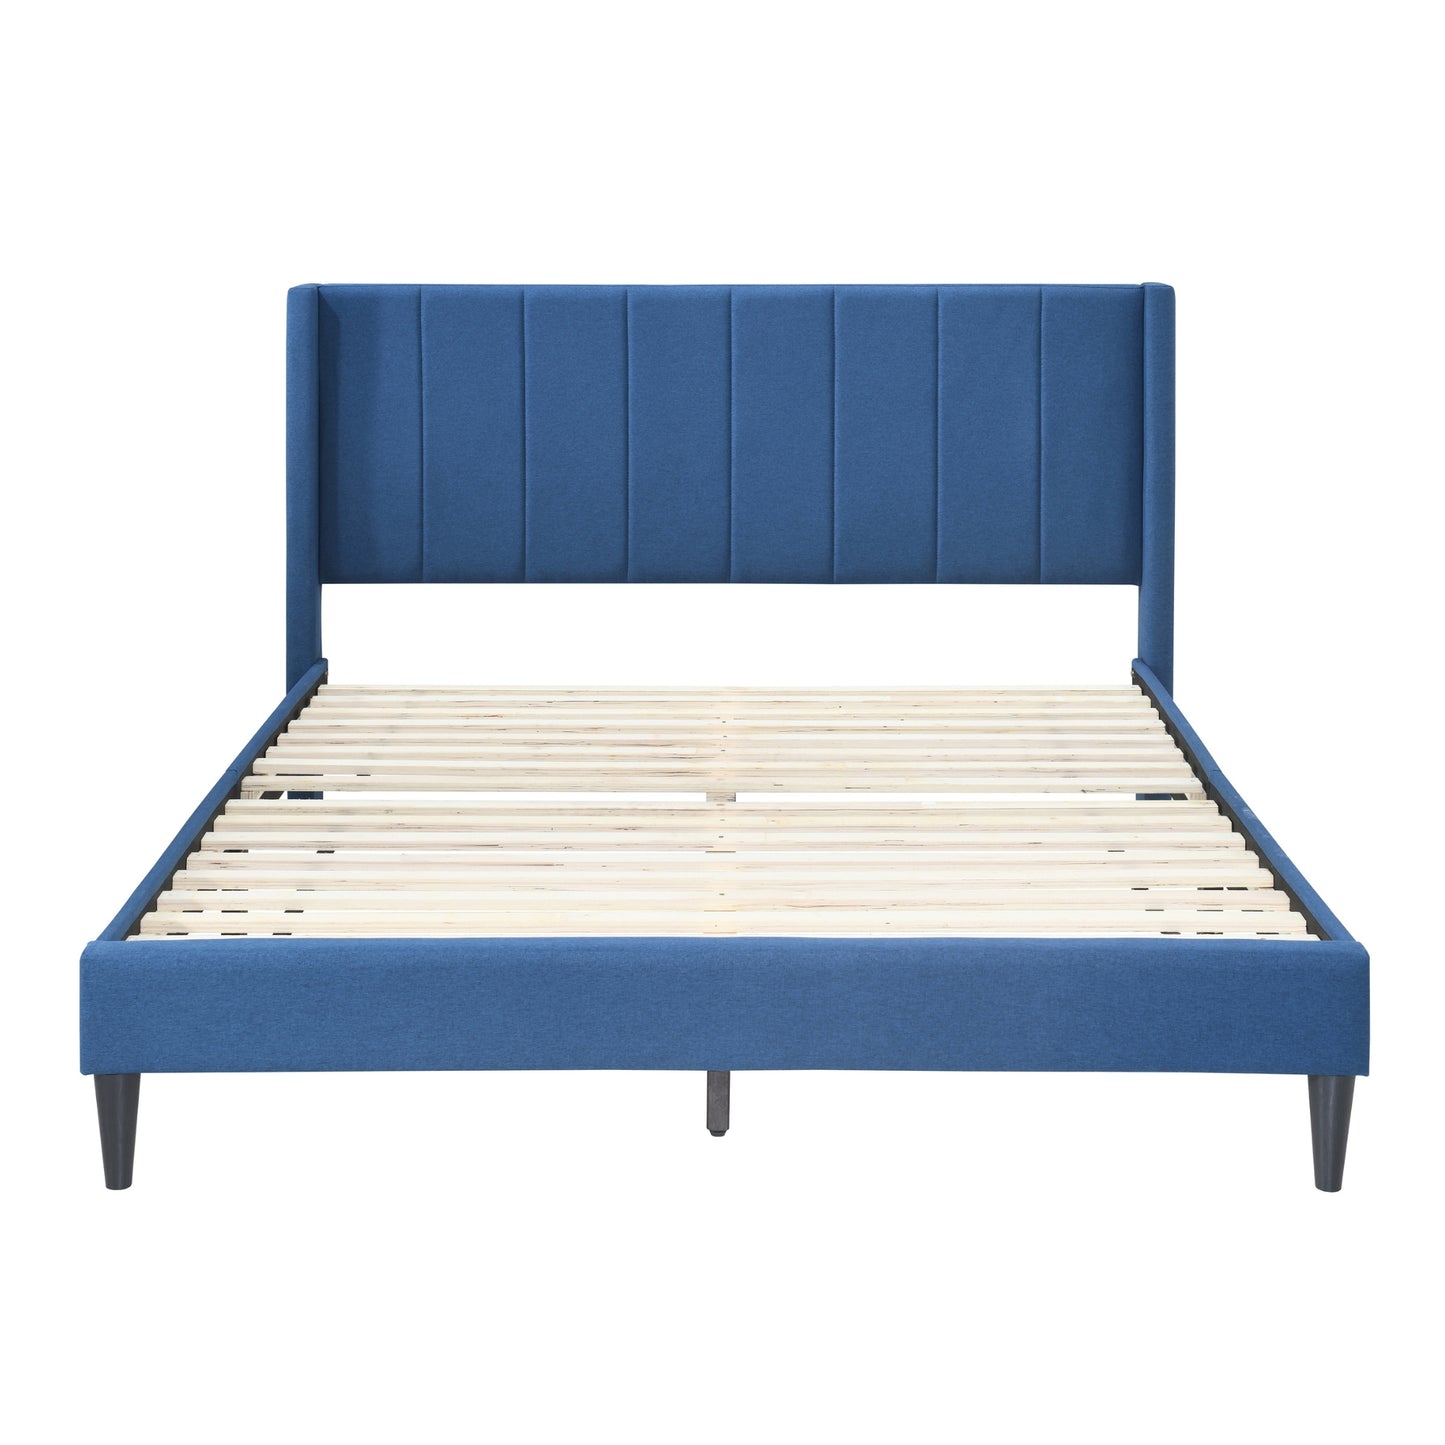 Samson Double Bed Winged Headboard Fabric Upholstered - Blue